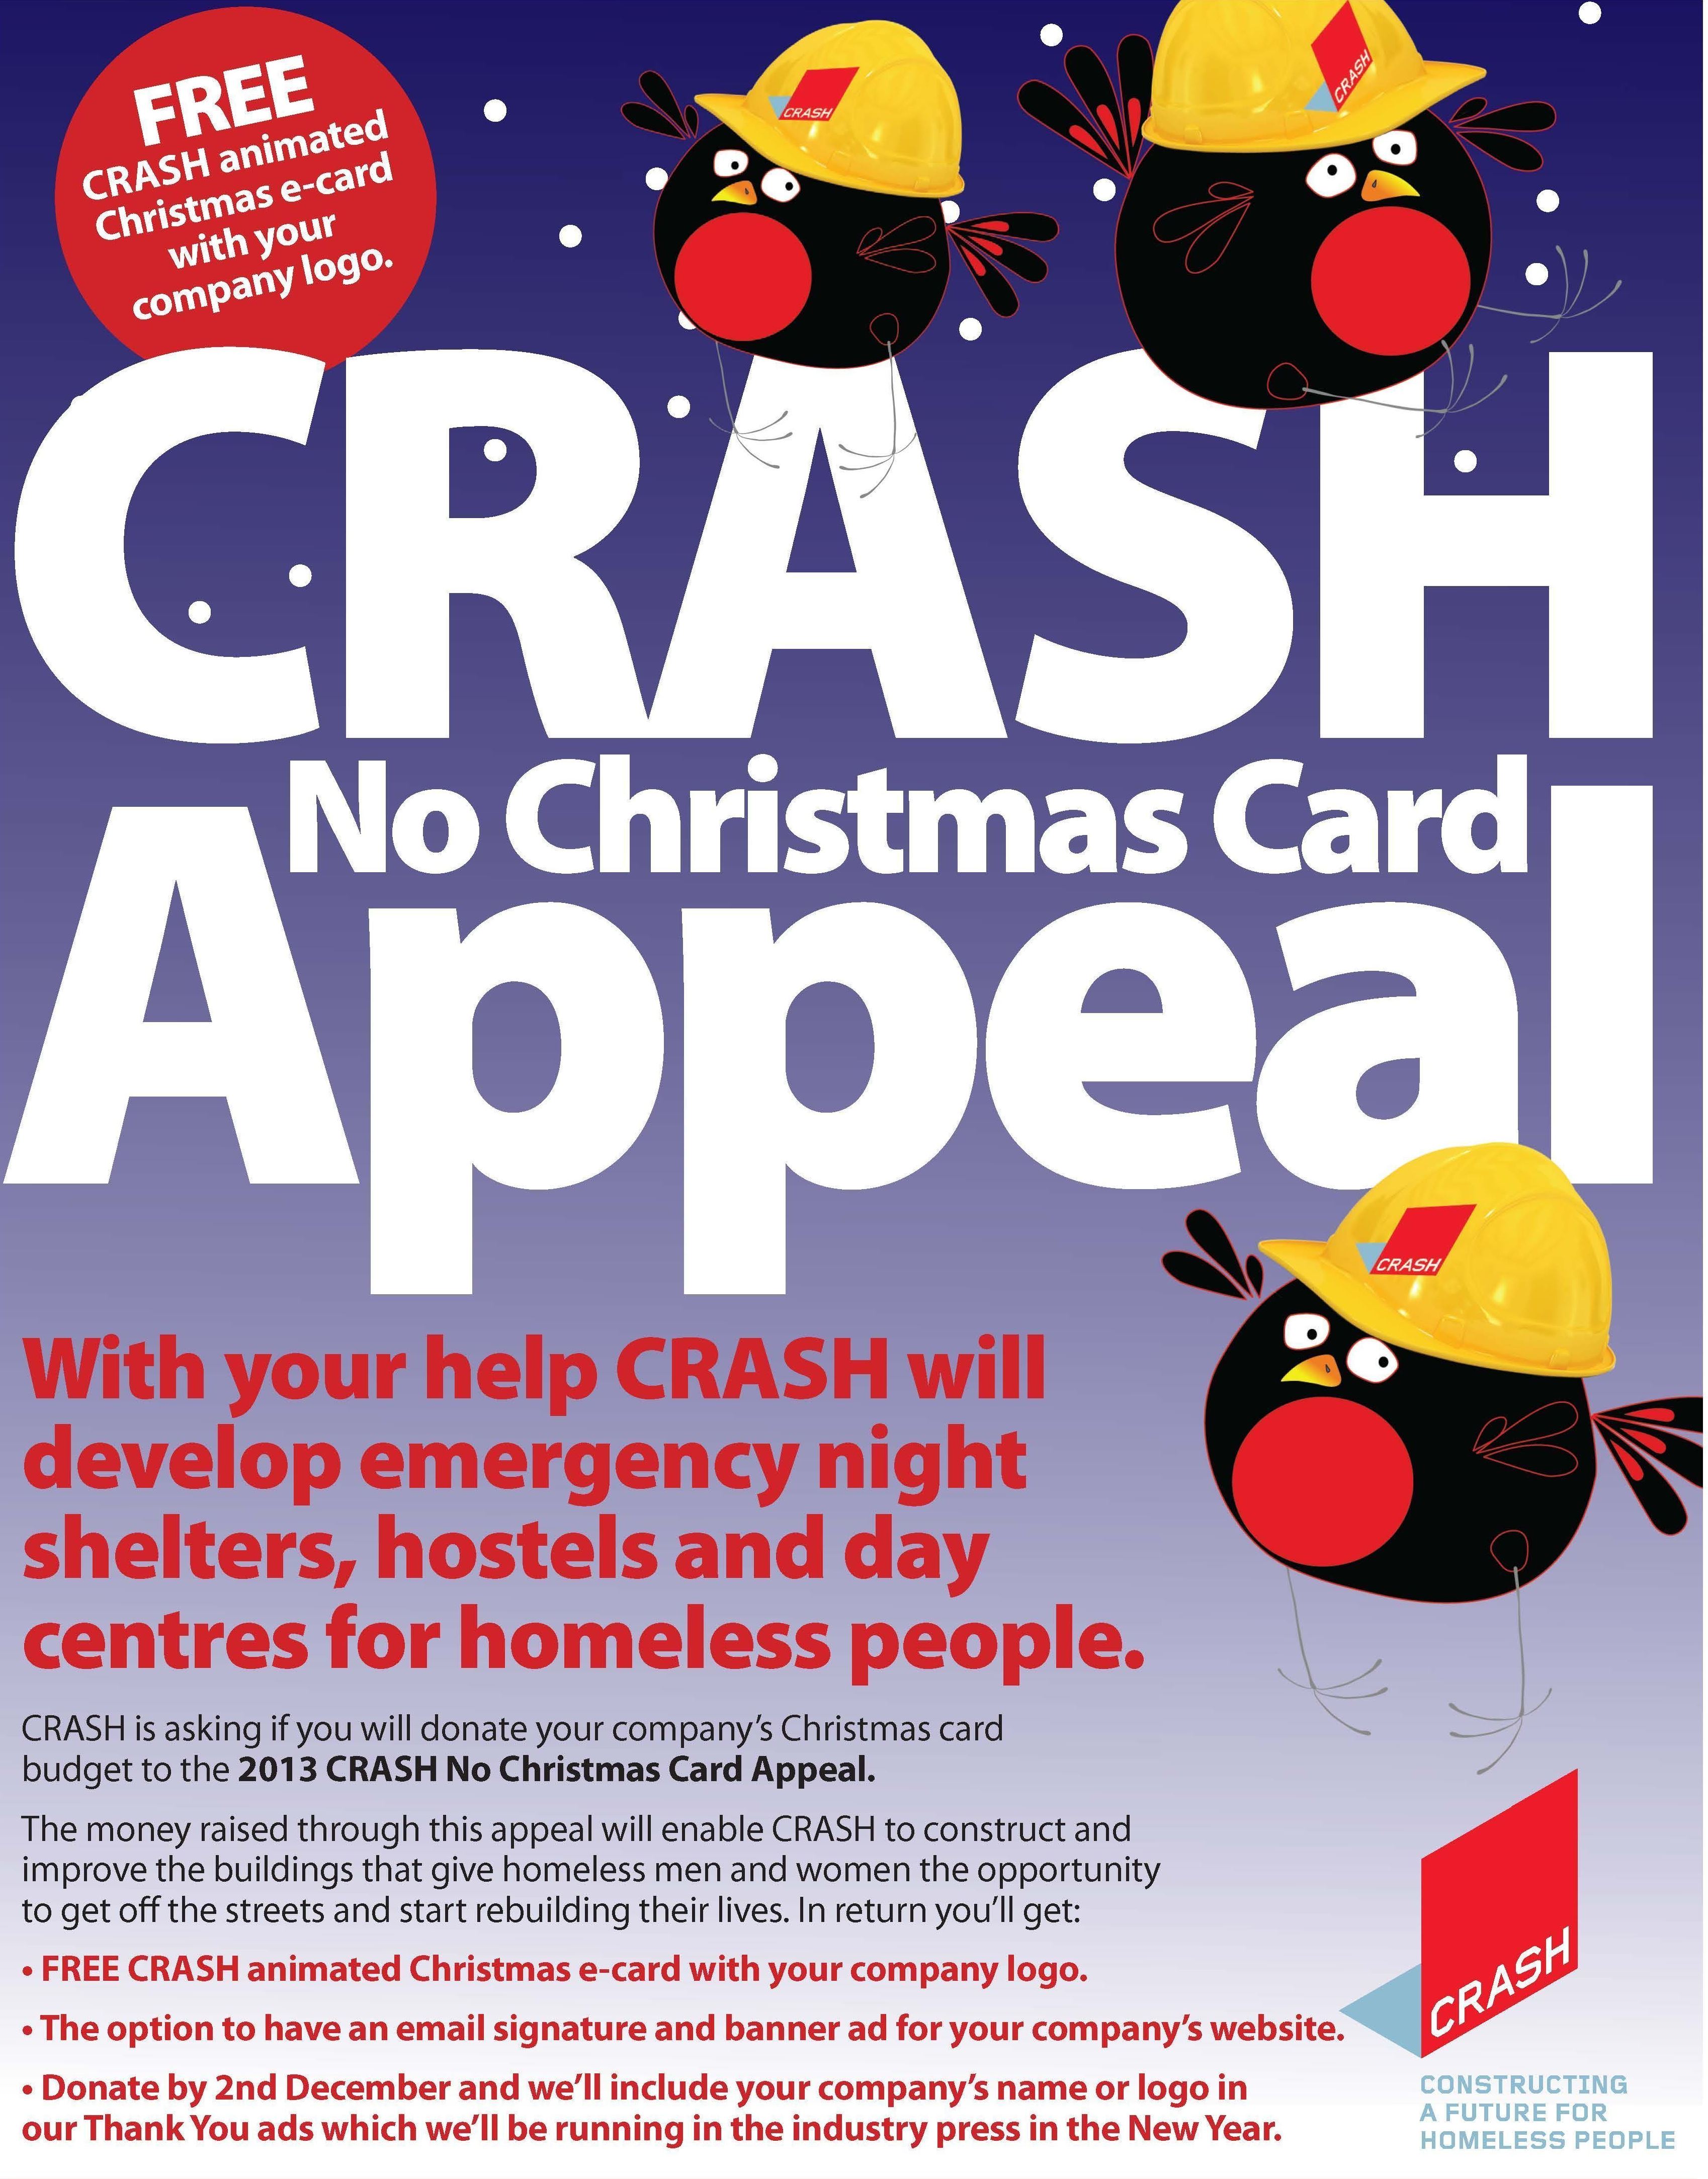 Crash launches No Christmas Card appeal